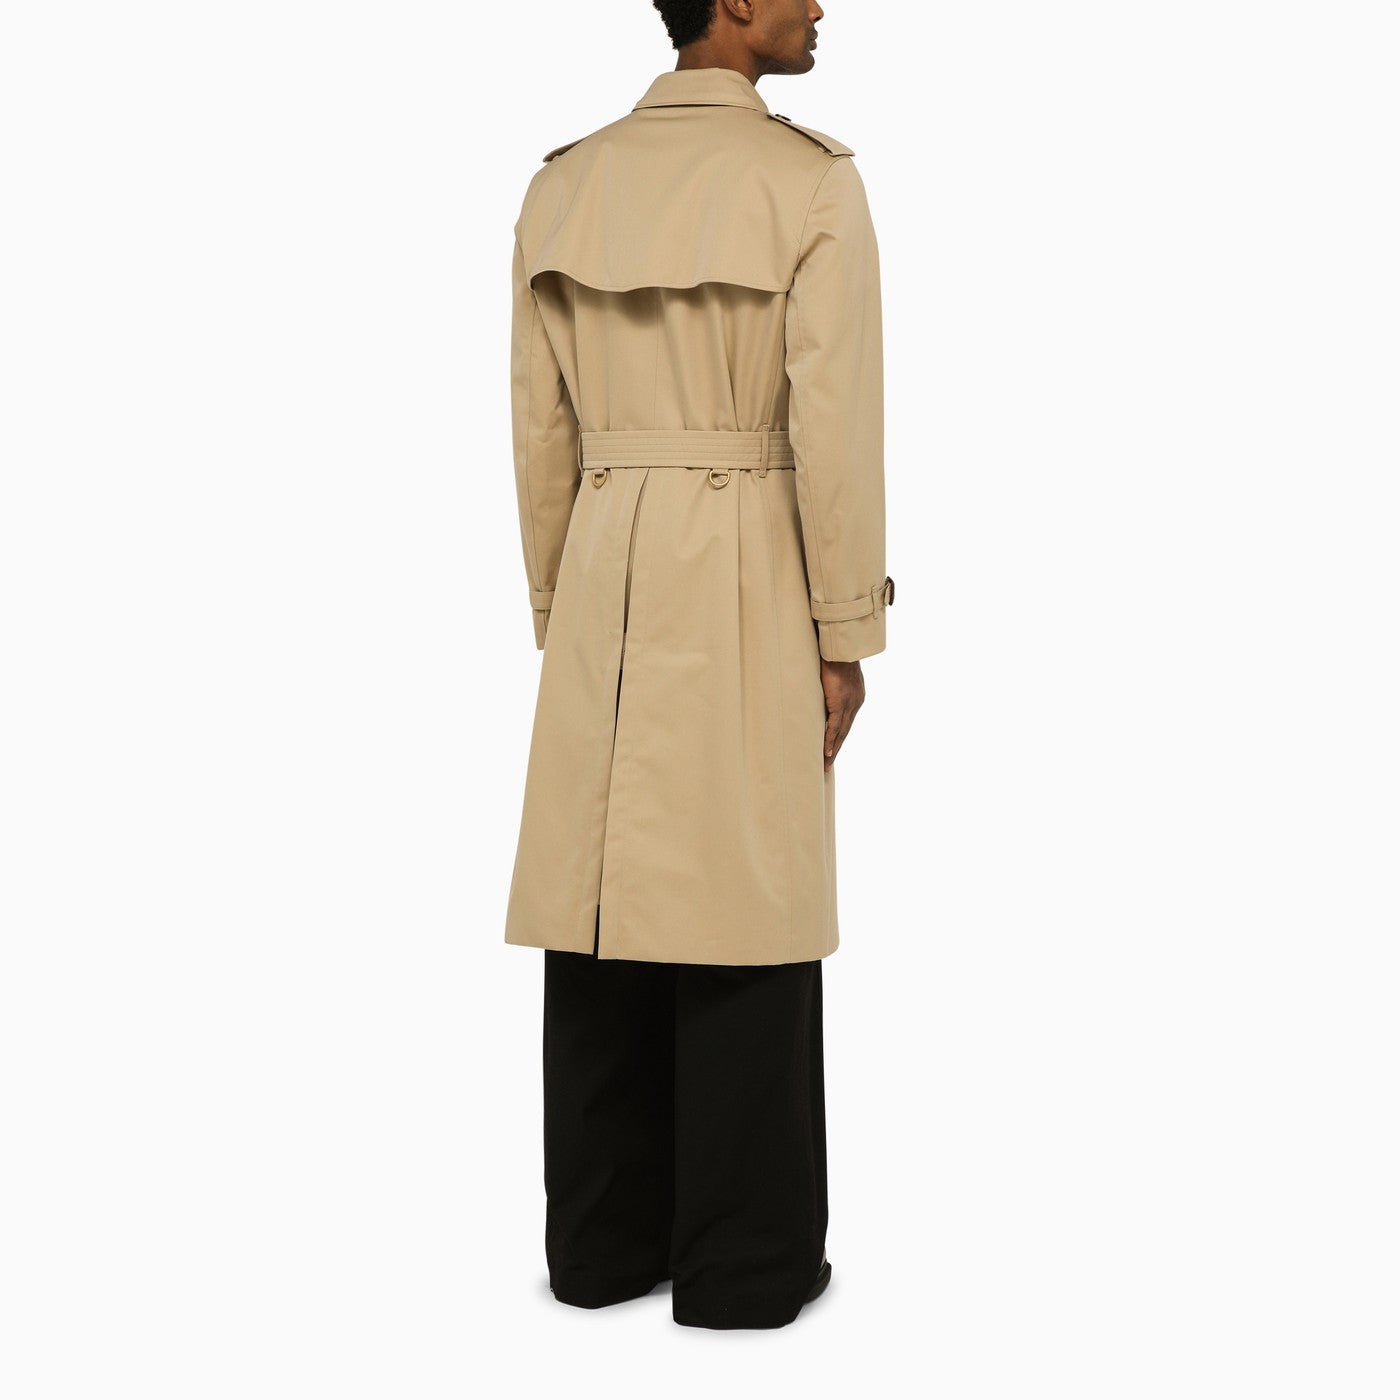 Burberry Trench Coat Double Breasted Kensington - 3